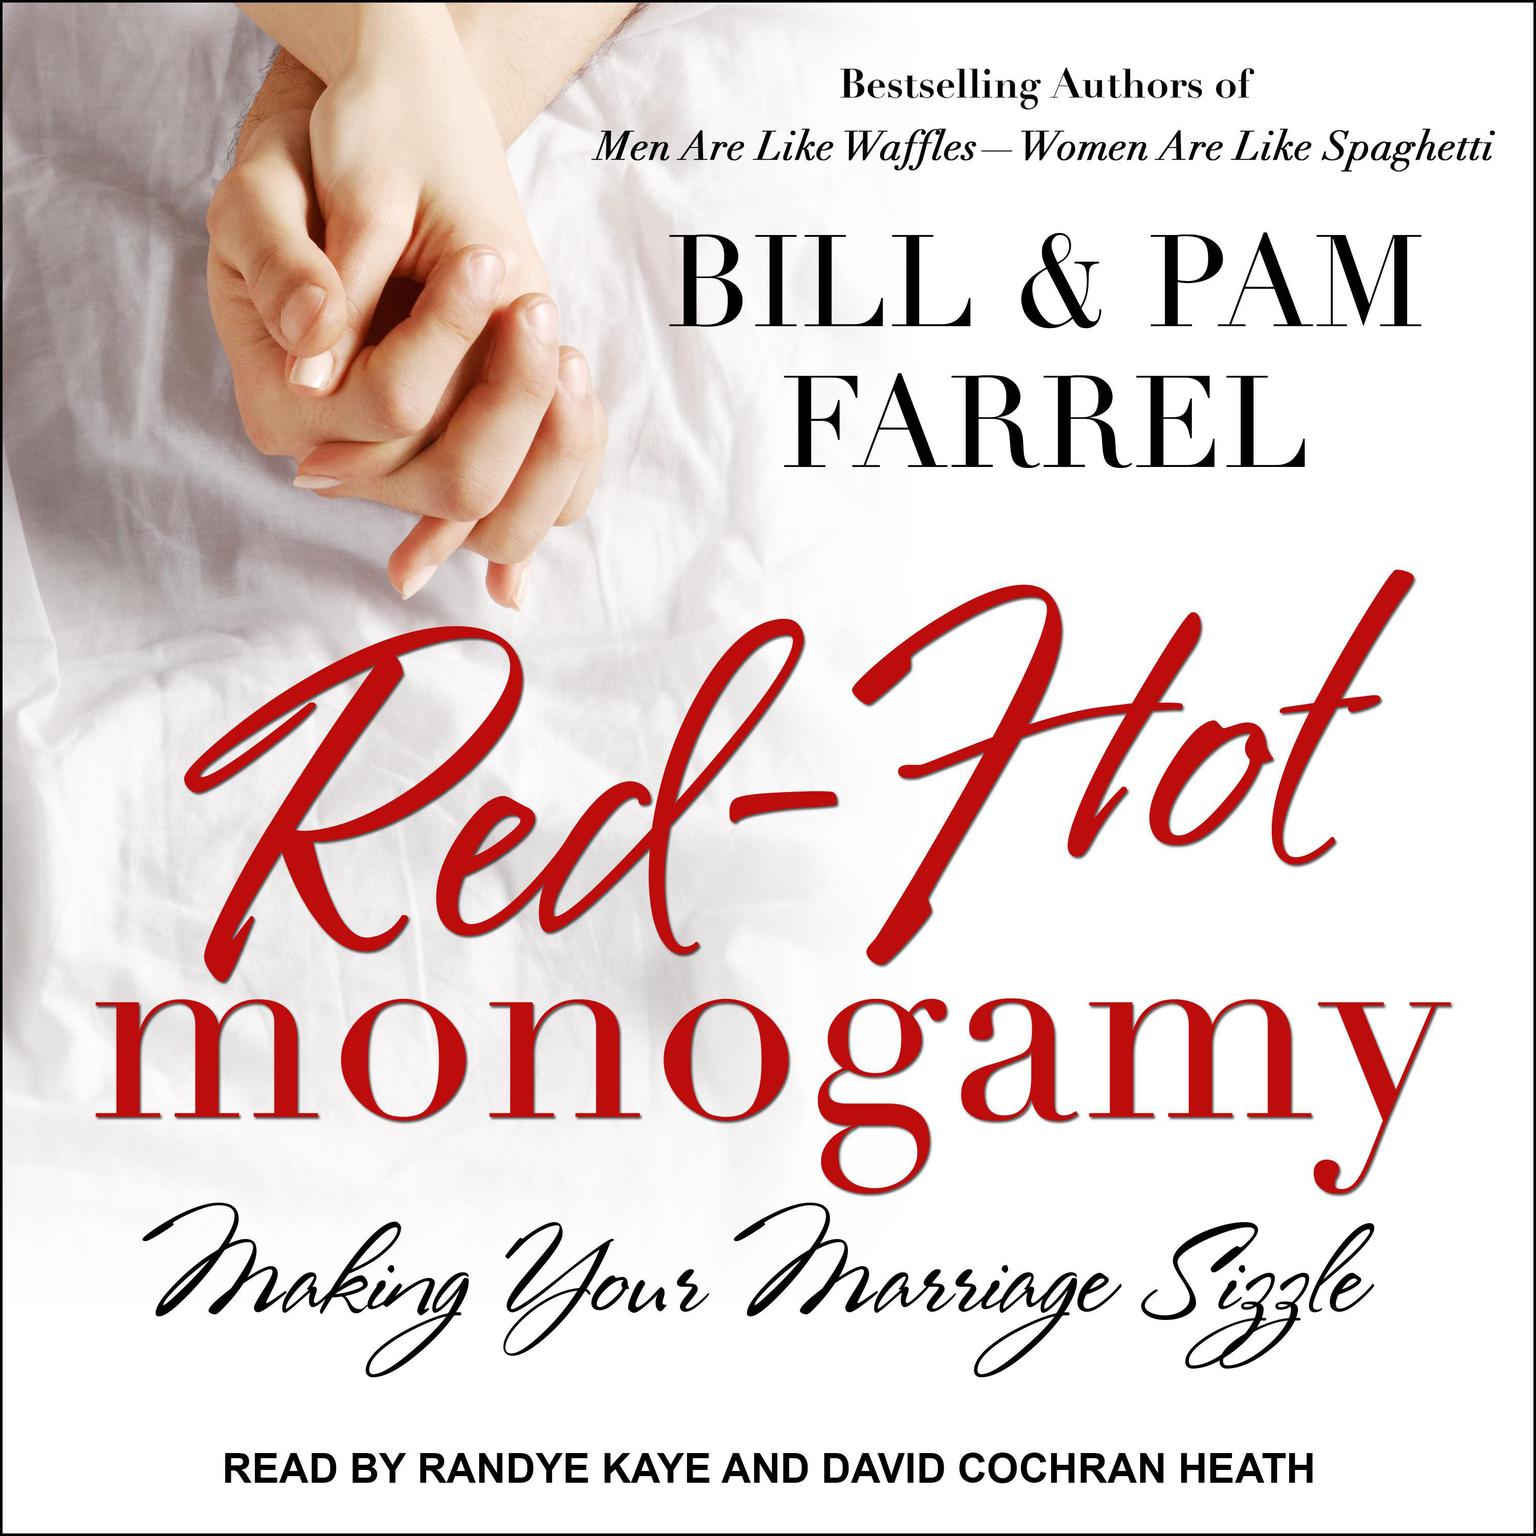 Red-Hot Monogamy: Making Your Marriage Sizzle Audiobook, by Bill Farrel